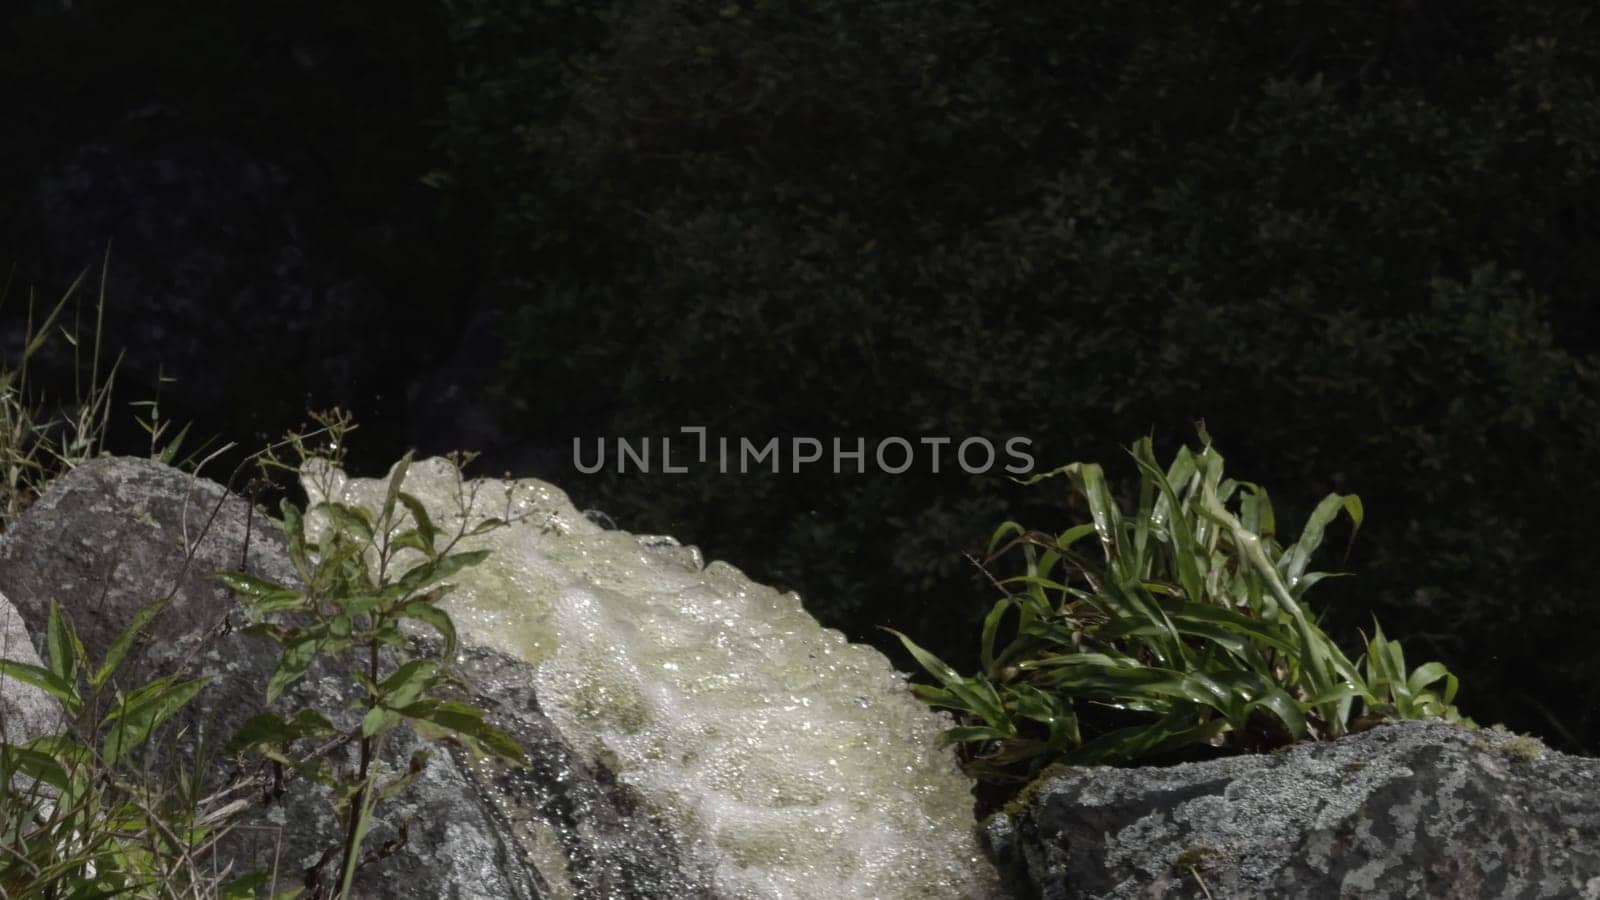 Captivating slow-mo video of a waterfall descending into darkness, surrounded by vibrant greenery.